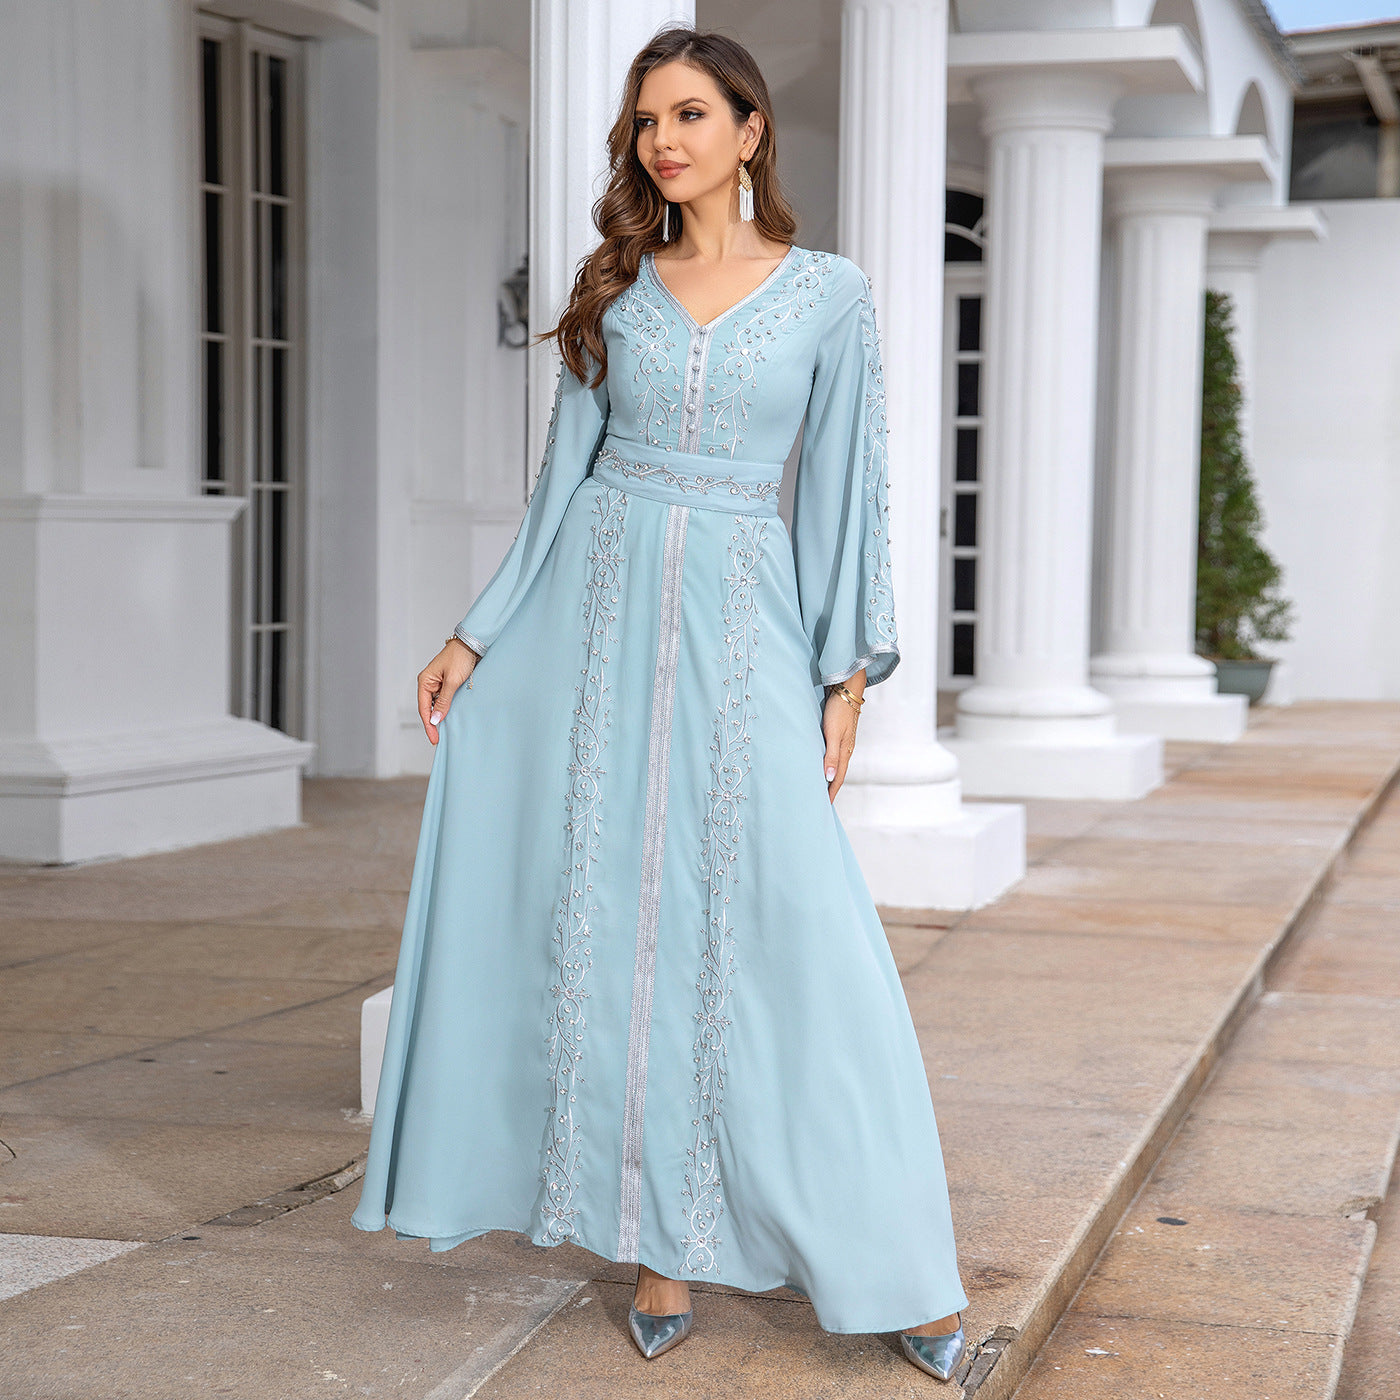 Women's Embroidered Luxury Party Dress